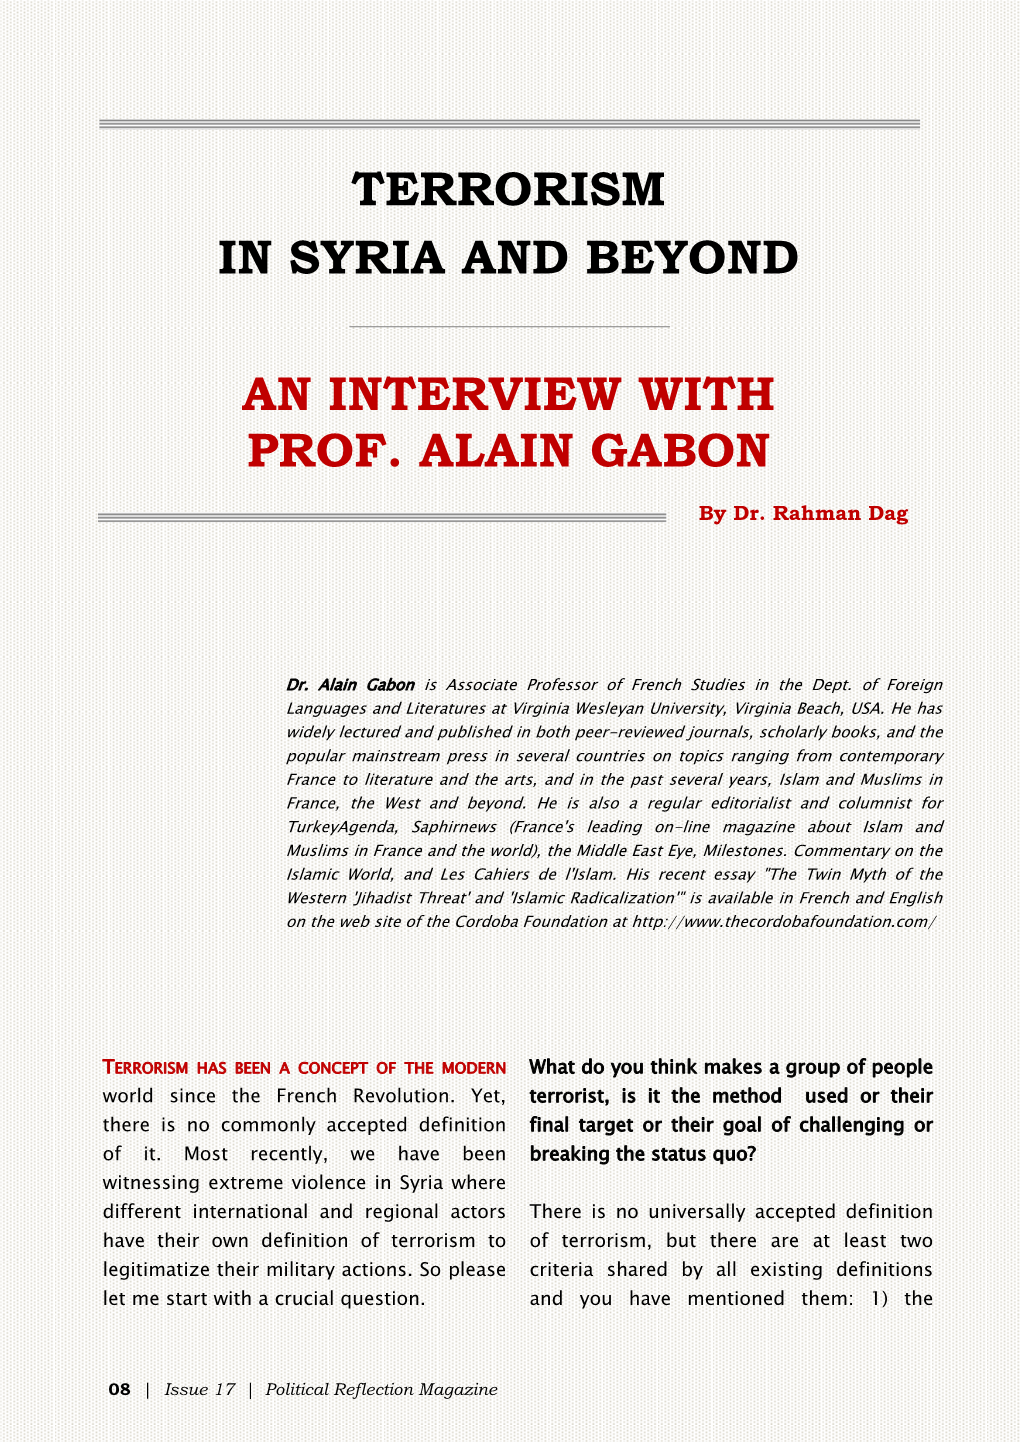 Terrorism in Syria and Beyond an Interview with Prof